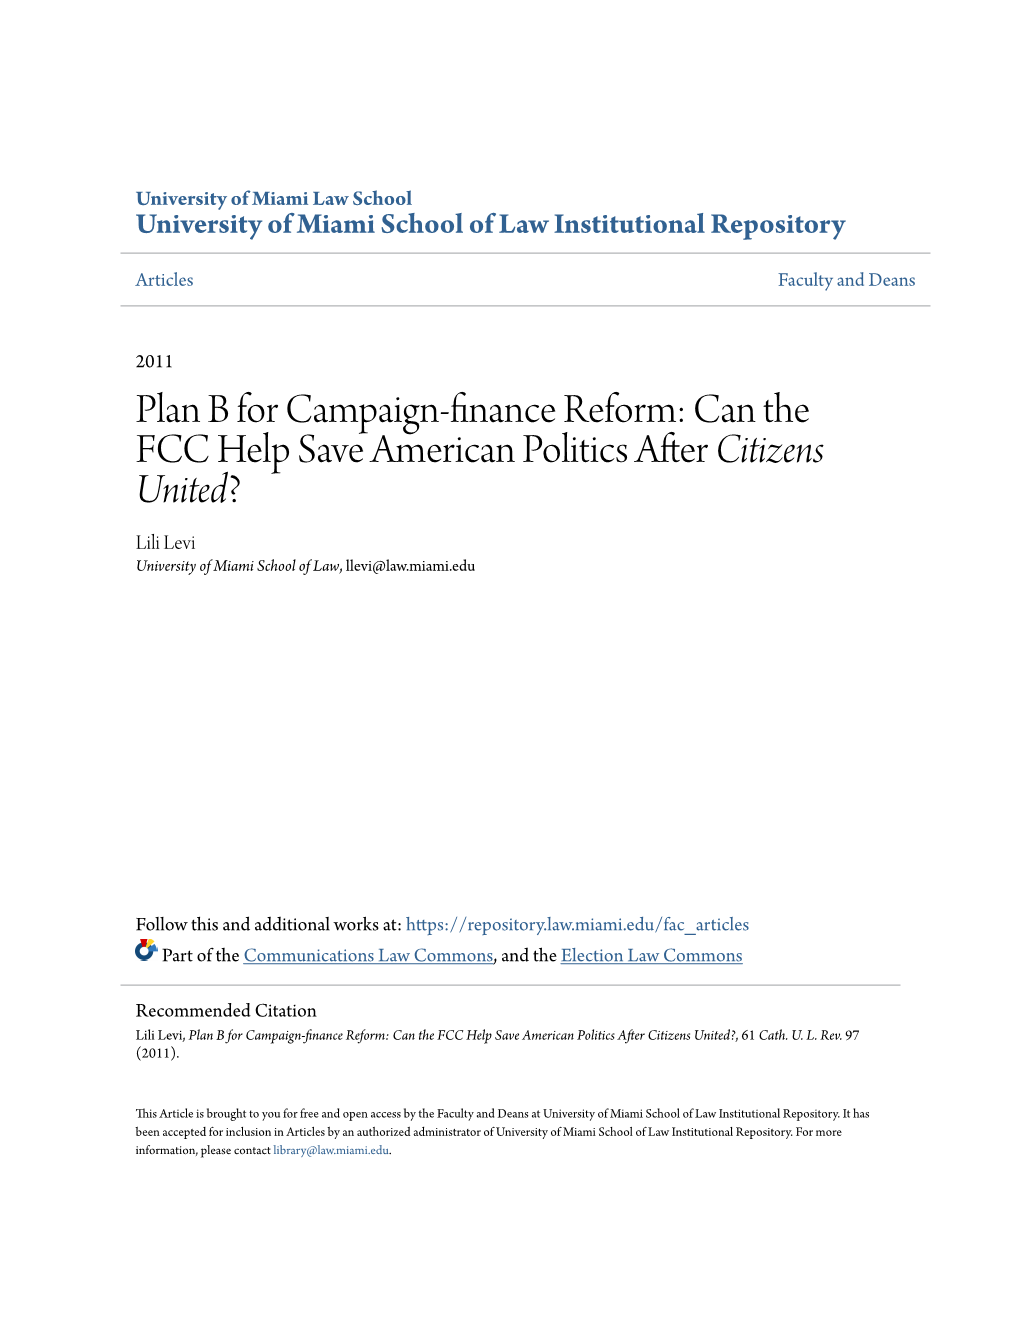 Plan B for Campaign-Finance Reform: Can the FCC Help Save American Politics After Citizens United? Lili Levi University of Miami School of Law, Llevi@Law.Miami.Edu